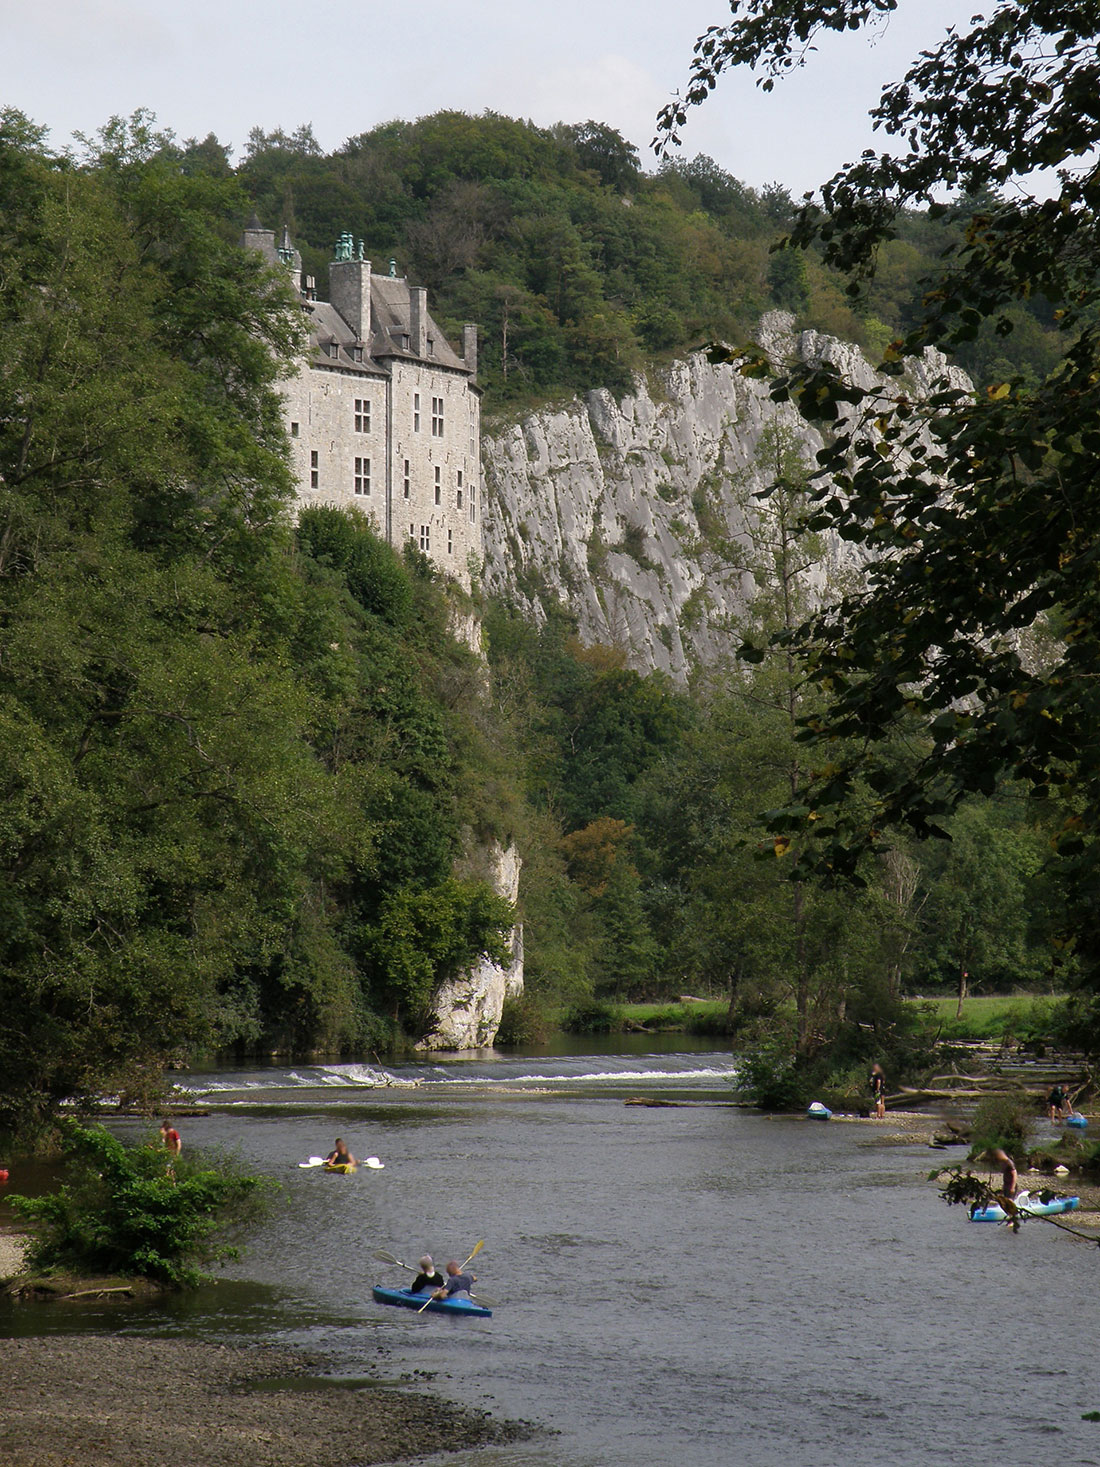 View of the Walzin castle and river Lesse